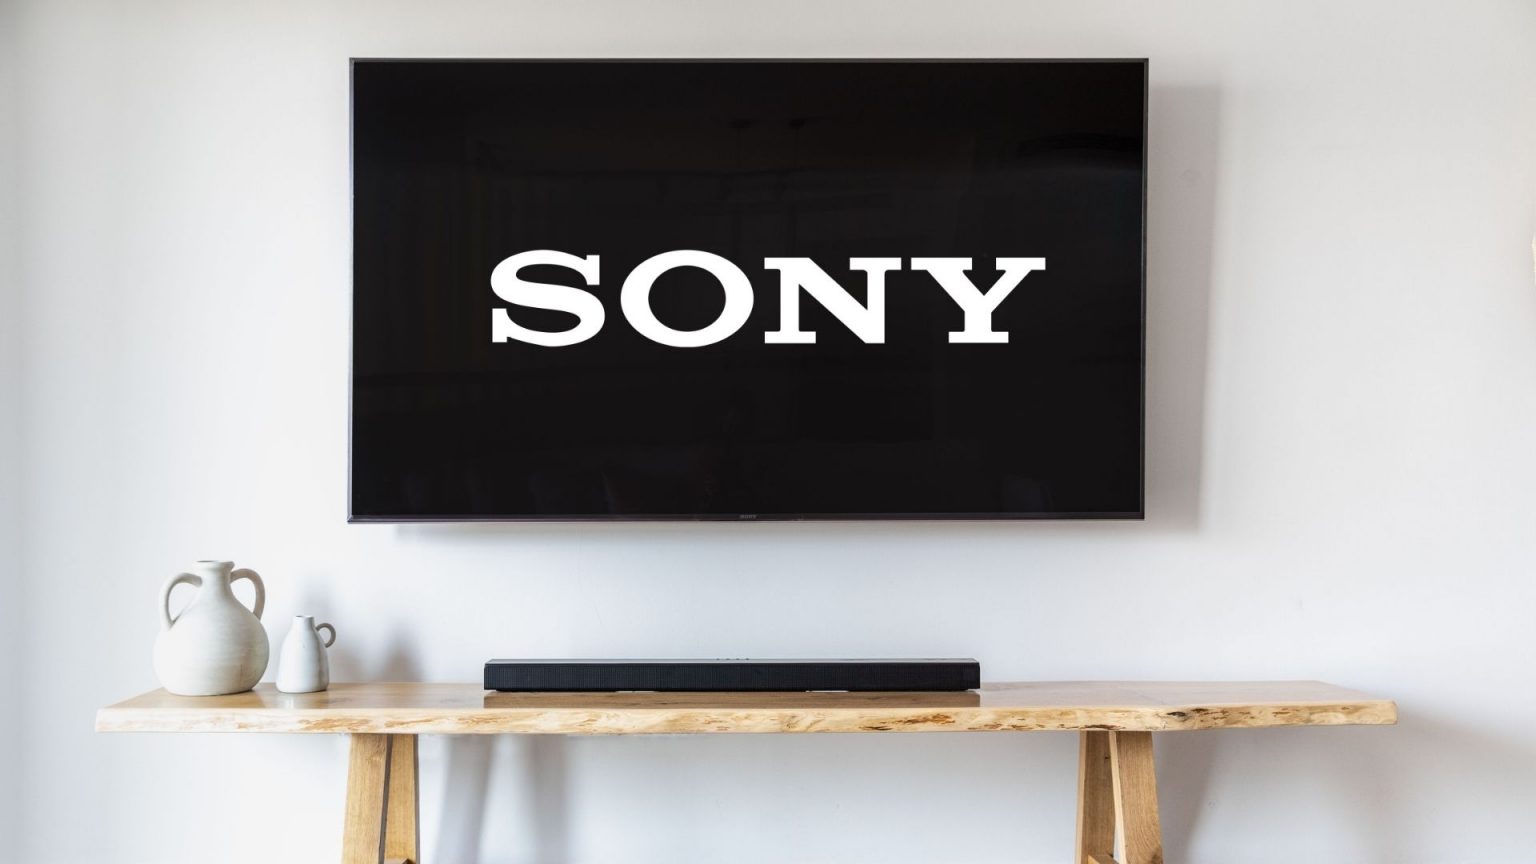 Sony is launching a streaming service exclusive to its high-end Bravia TVs, Disney+ is the most downloaded VOD app in U.S. and other top news